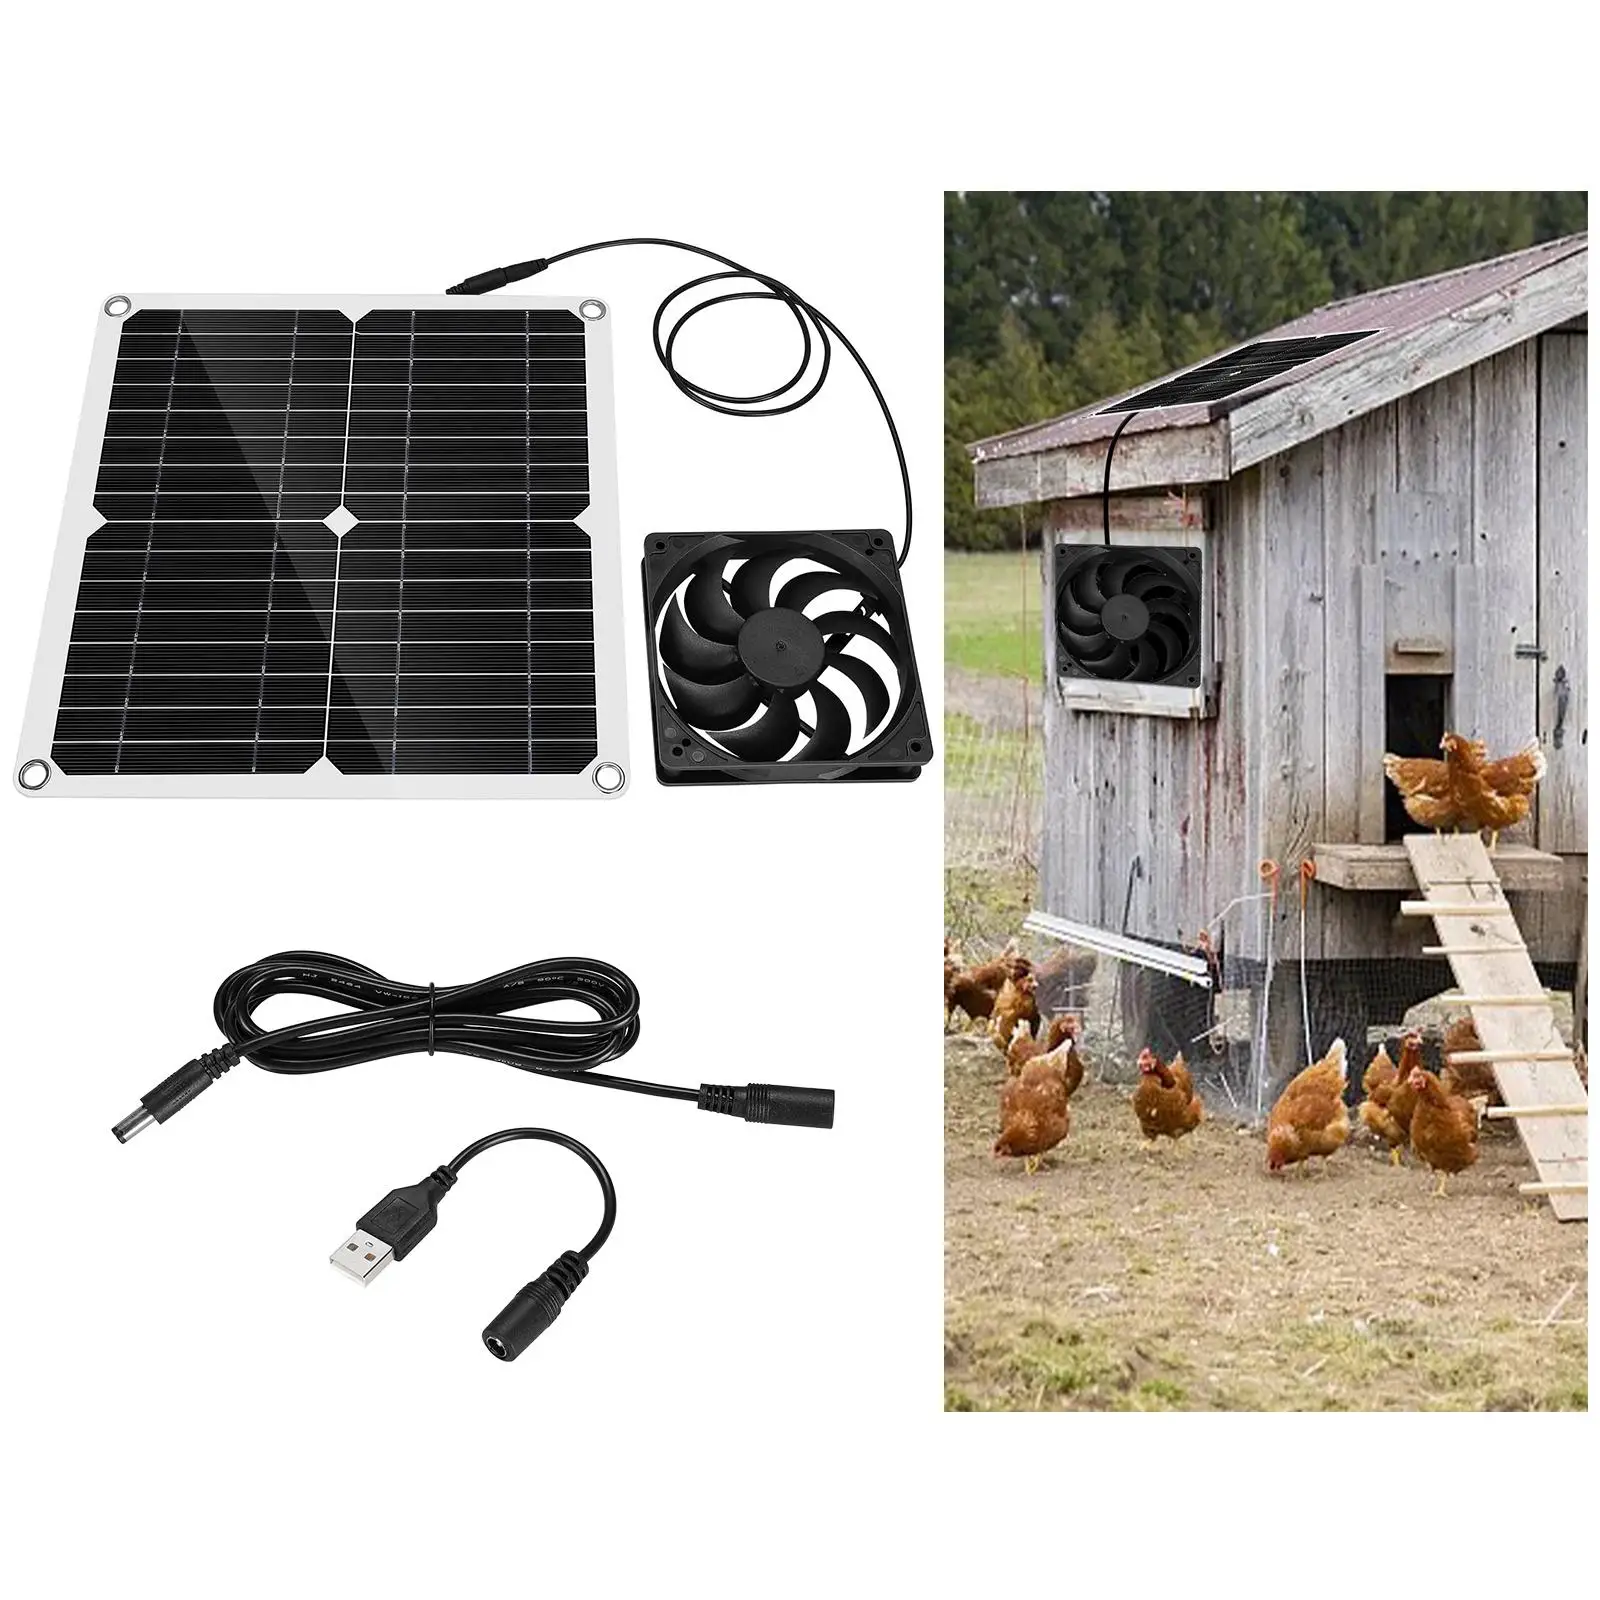 12W Solar Exhaust Fan Outdoor Ventilation Air Extractor 12V Mini Ventilator for Greenhouse Chicken House Pet House Phone Charger